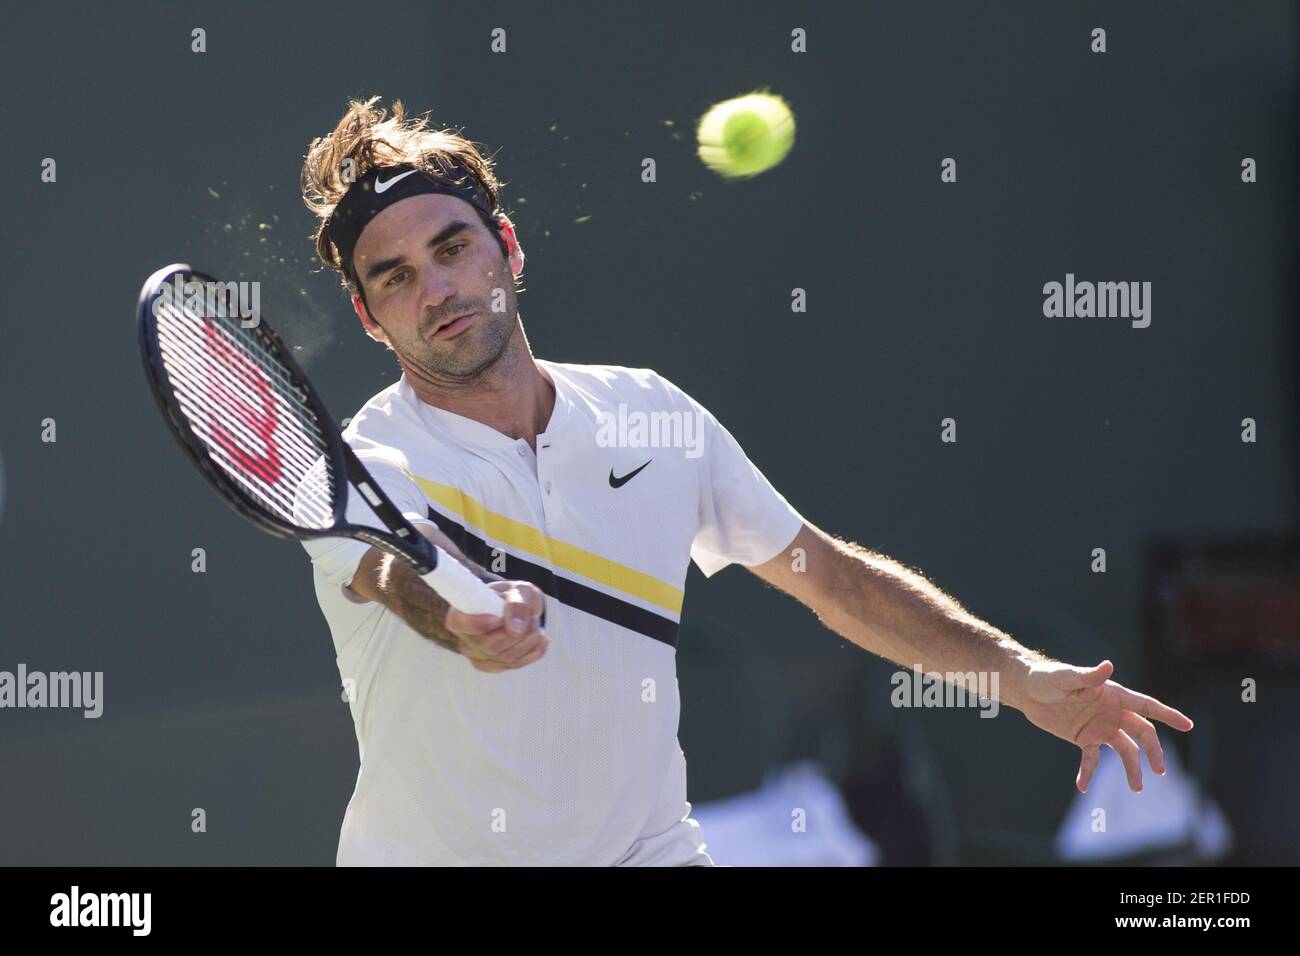 March 11, 2018: Roger Federer (SUI) defeated Federico Delbonis (ARG) 6-3,  7-6 (6) at the BNP Paribas Open played at the Indian Wells Tennis Garden in  Indian Wells, California. Â©Mal Taam/TennisClix/CSM/Sipa USA(Credit